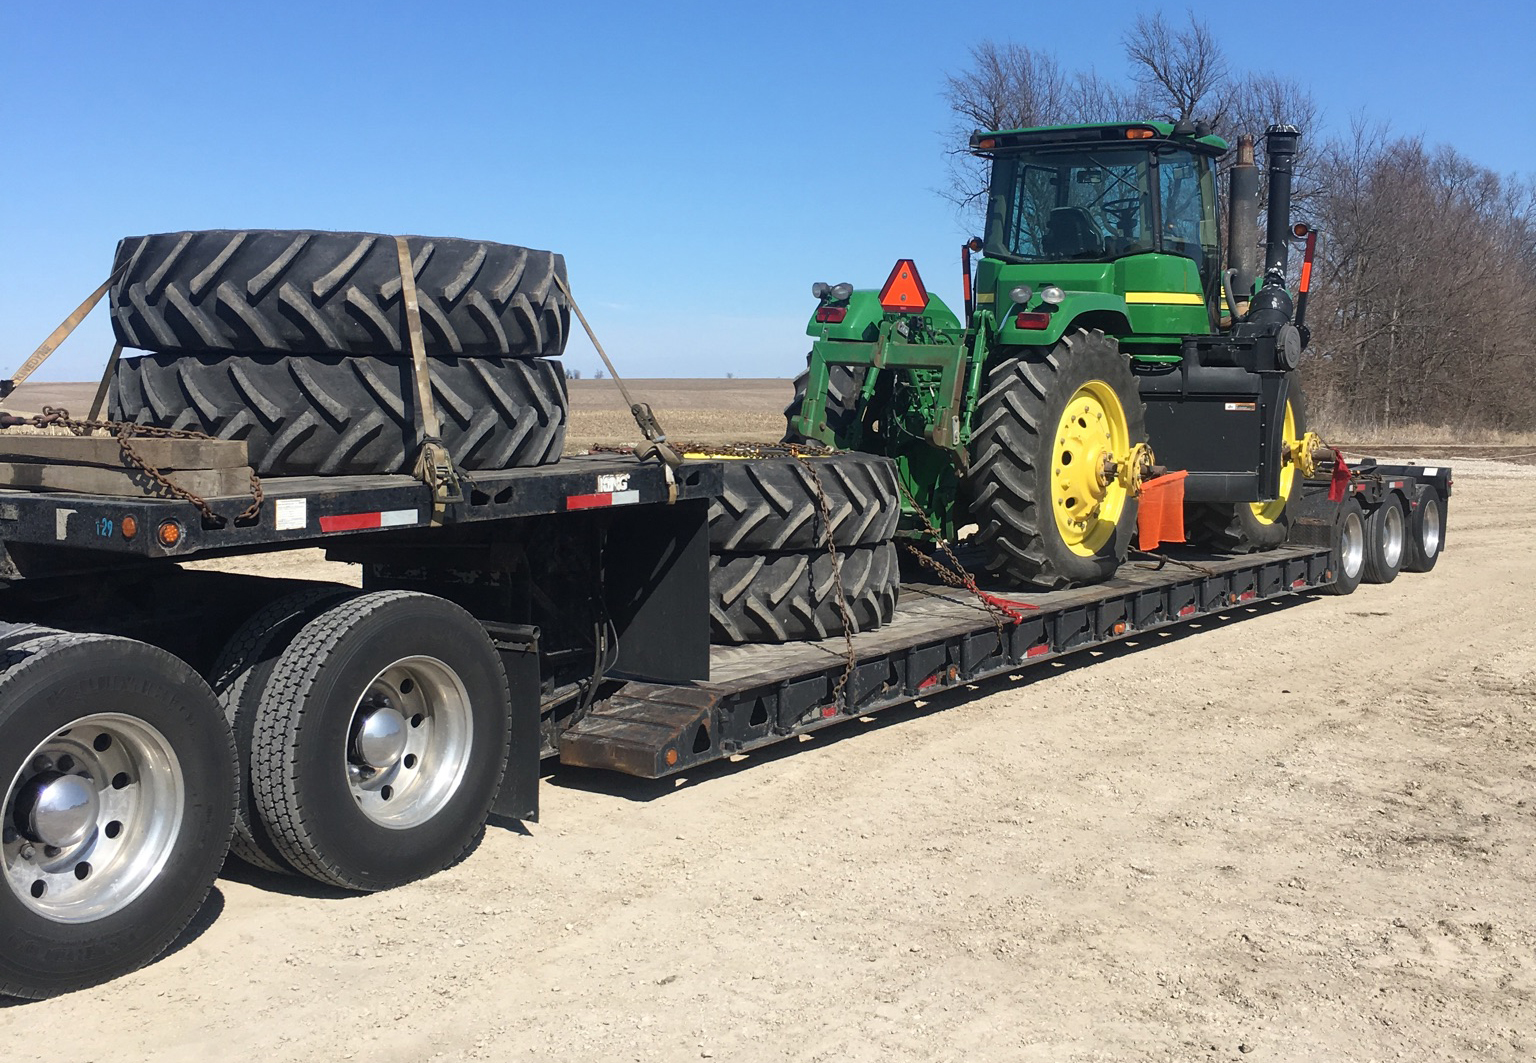 Process of Shipping a Tractor Through Carrier from One Location to Another